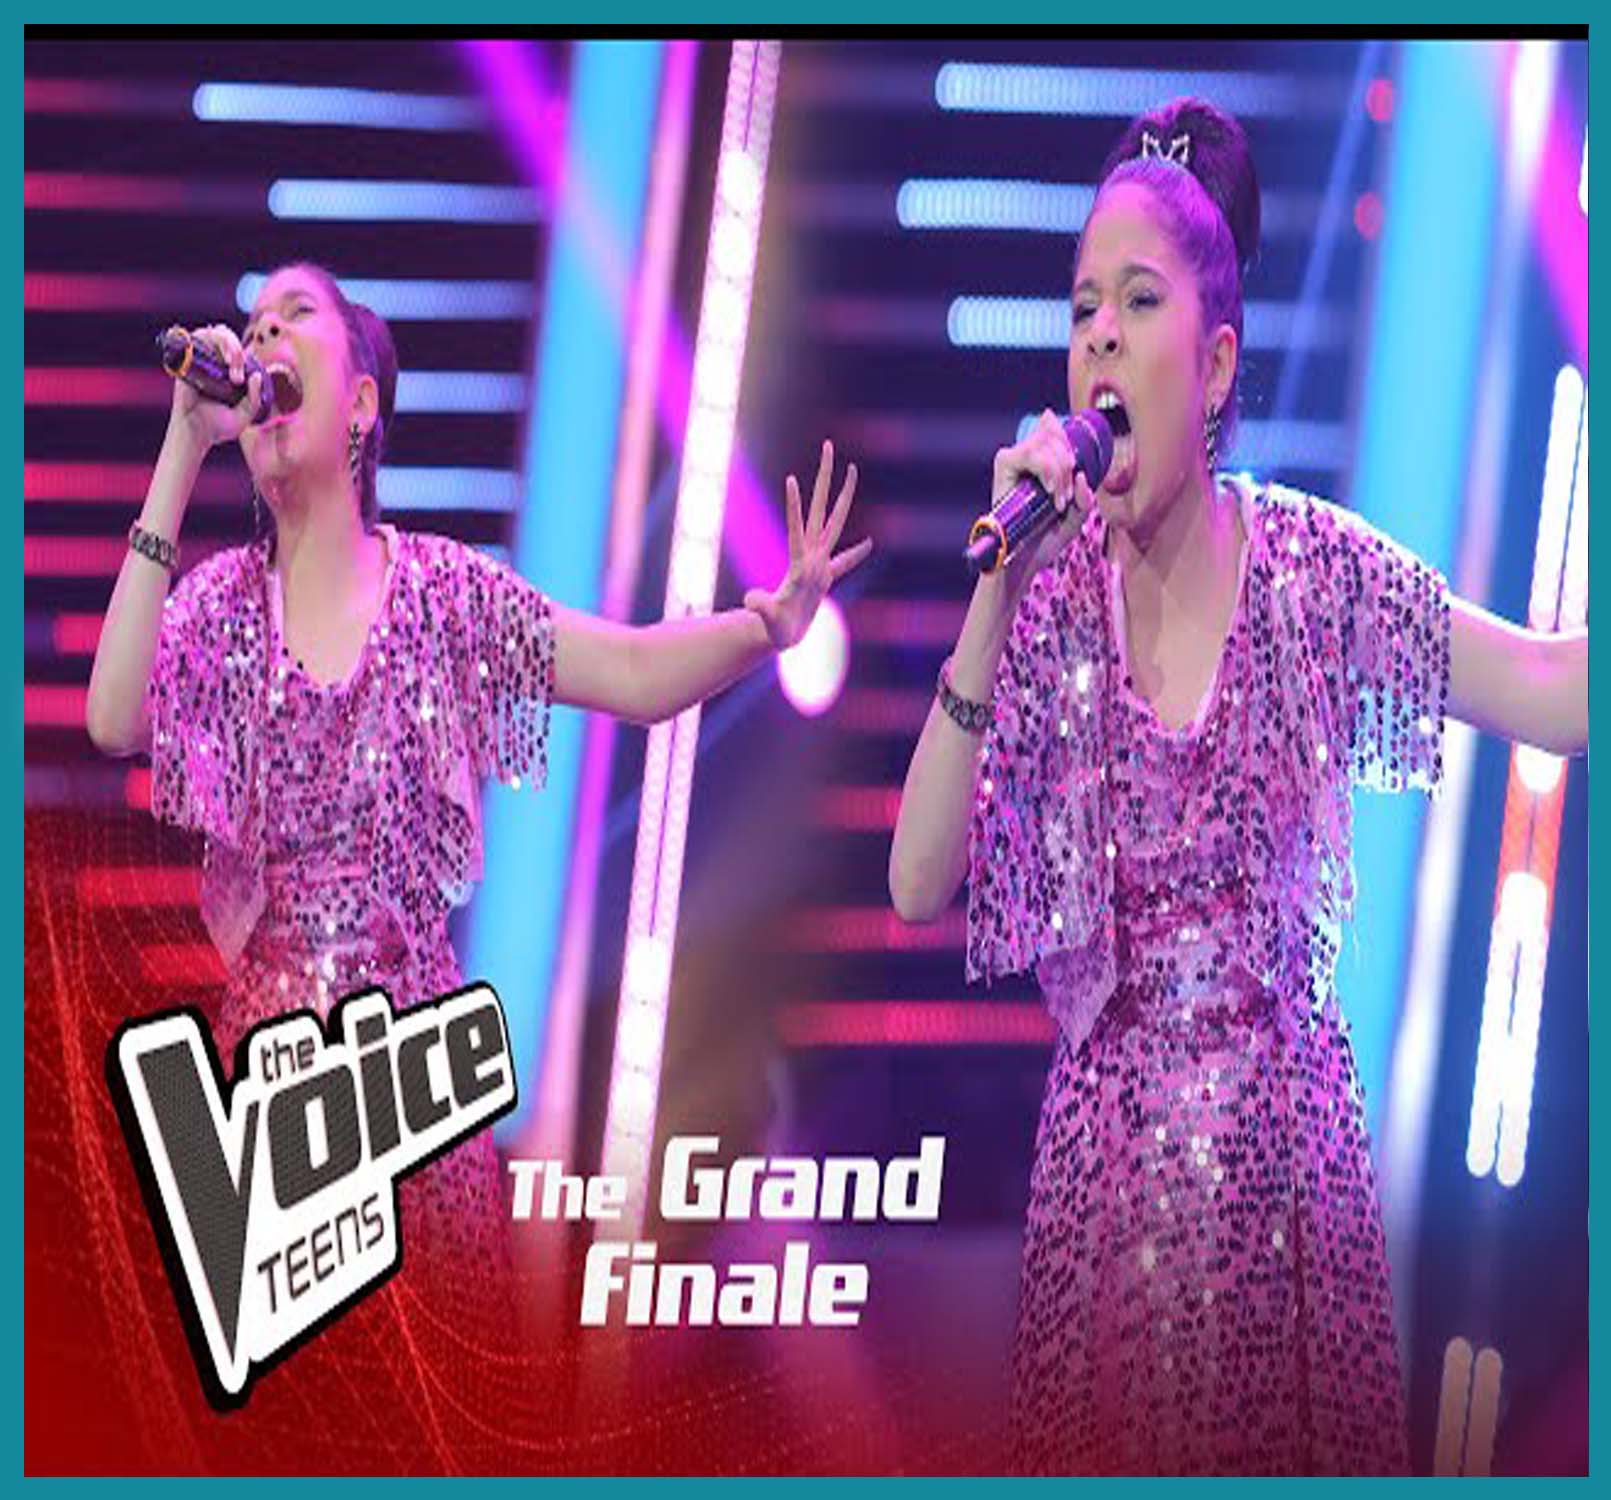 I Have Nothing (The Voice Teens Grand Finale)